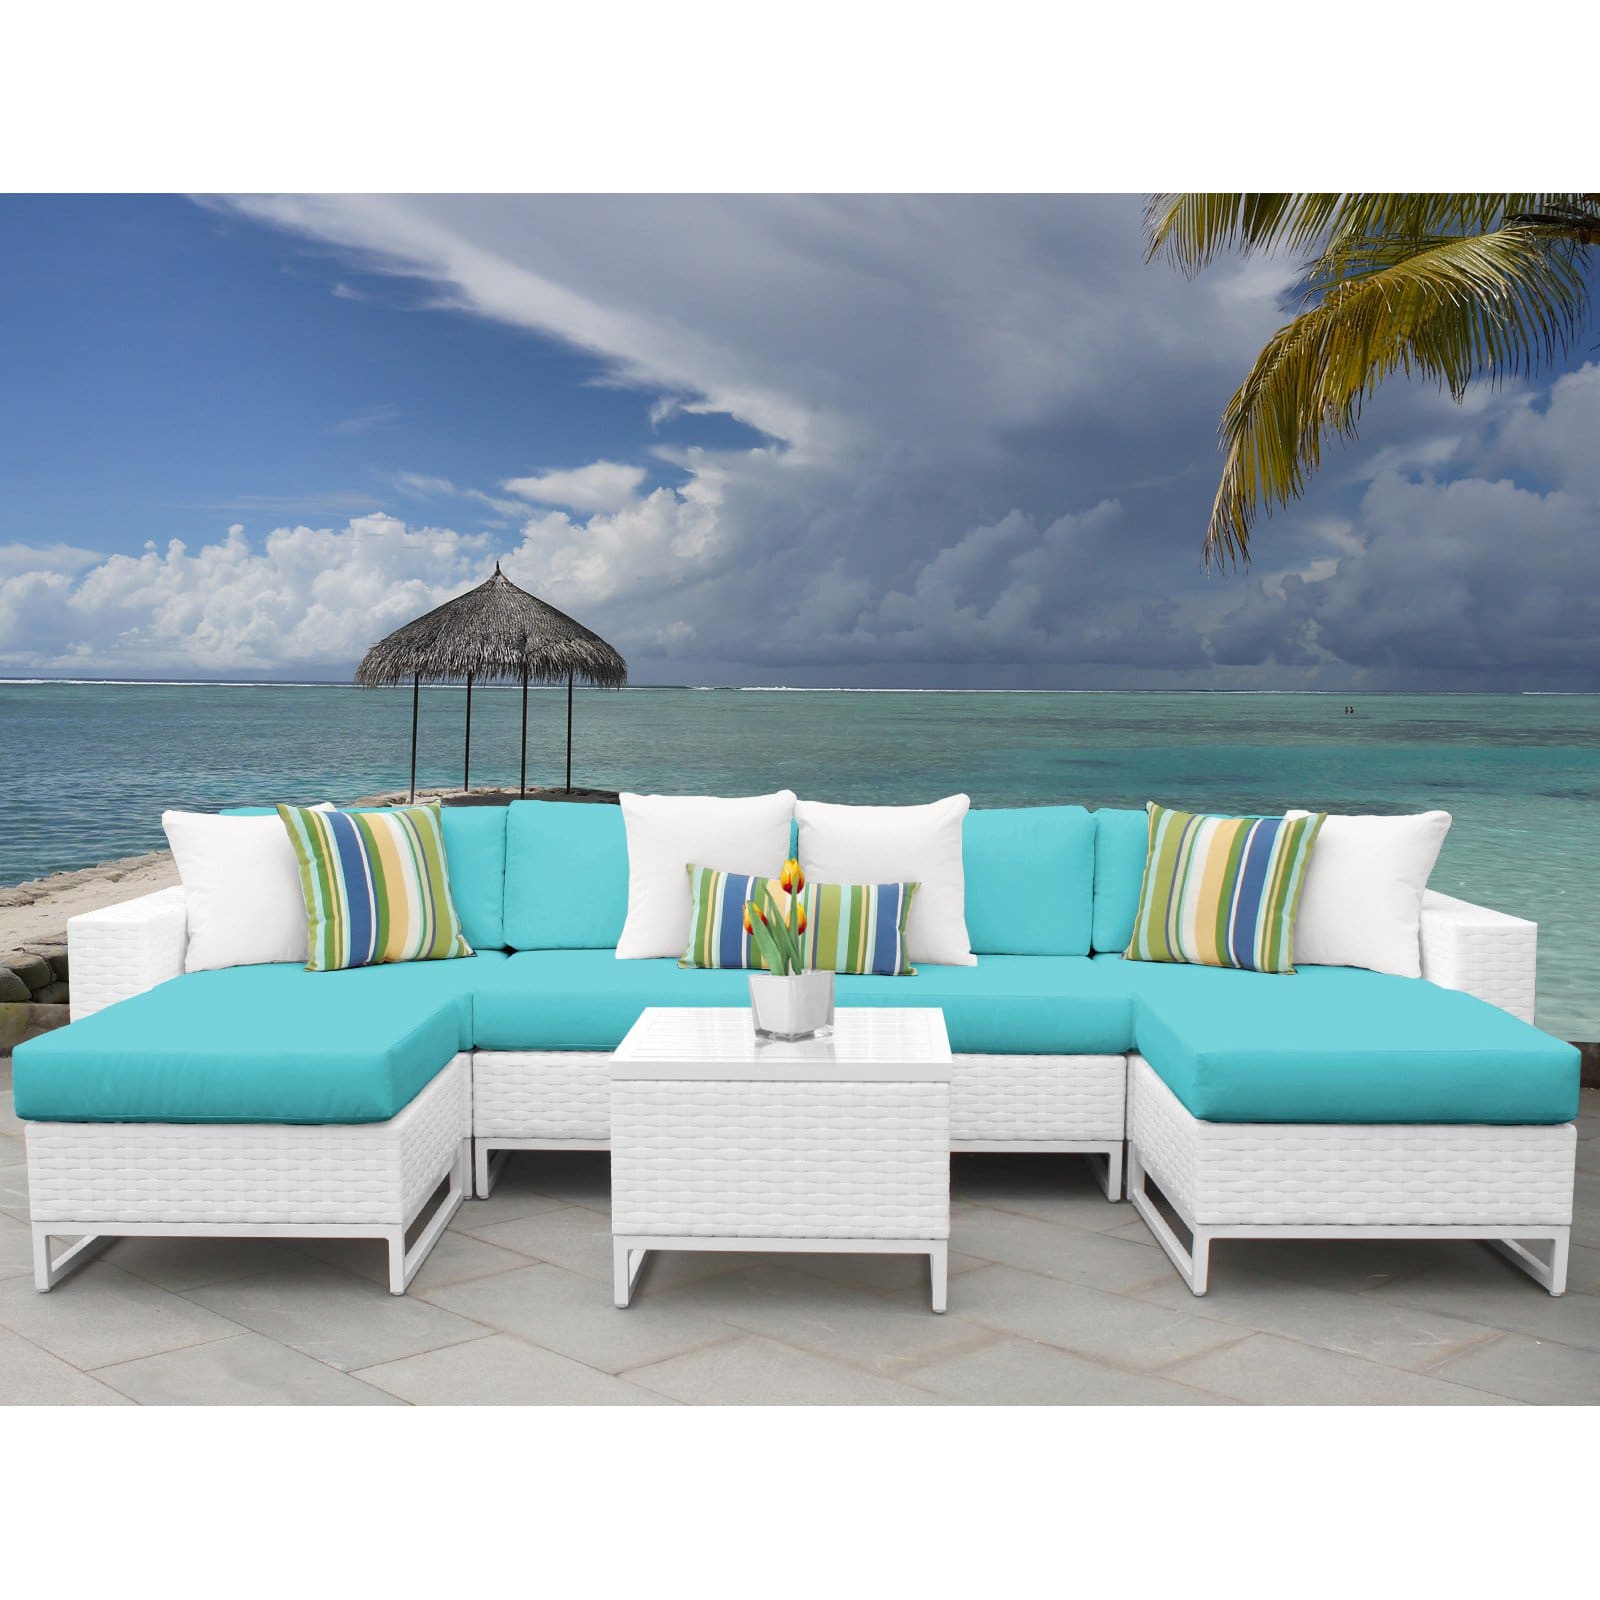 Florida 7-Piece Aluminum Framed Outdoor Conversation Set with Accent Table - image 2 of 3